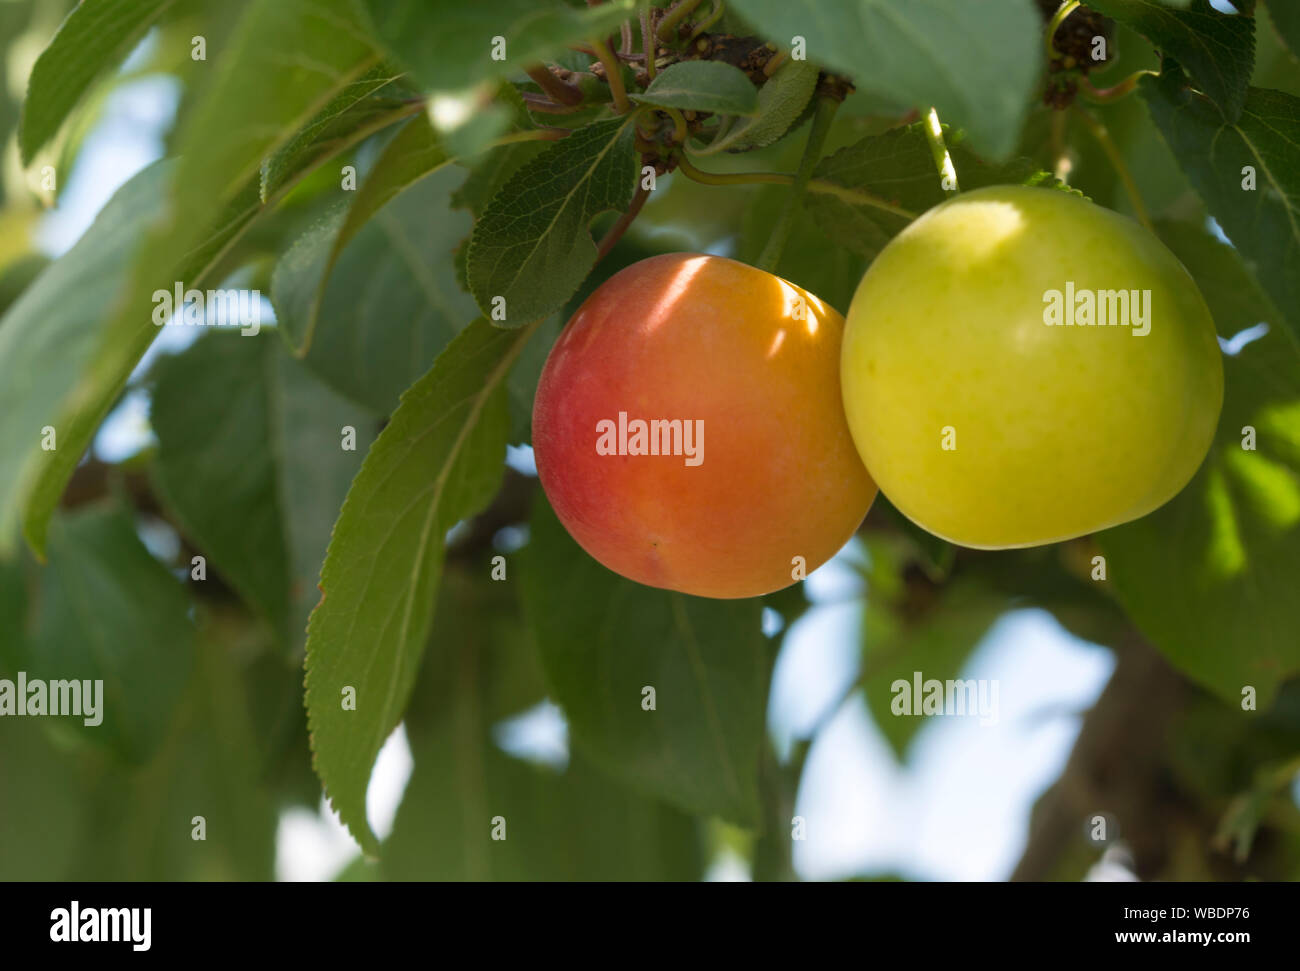 Mirabelle plum, yellow and red mirabelle plums, isolated on plum tree branch Stock Photo